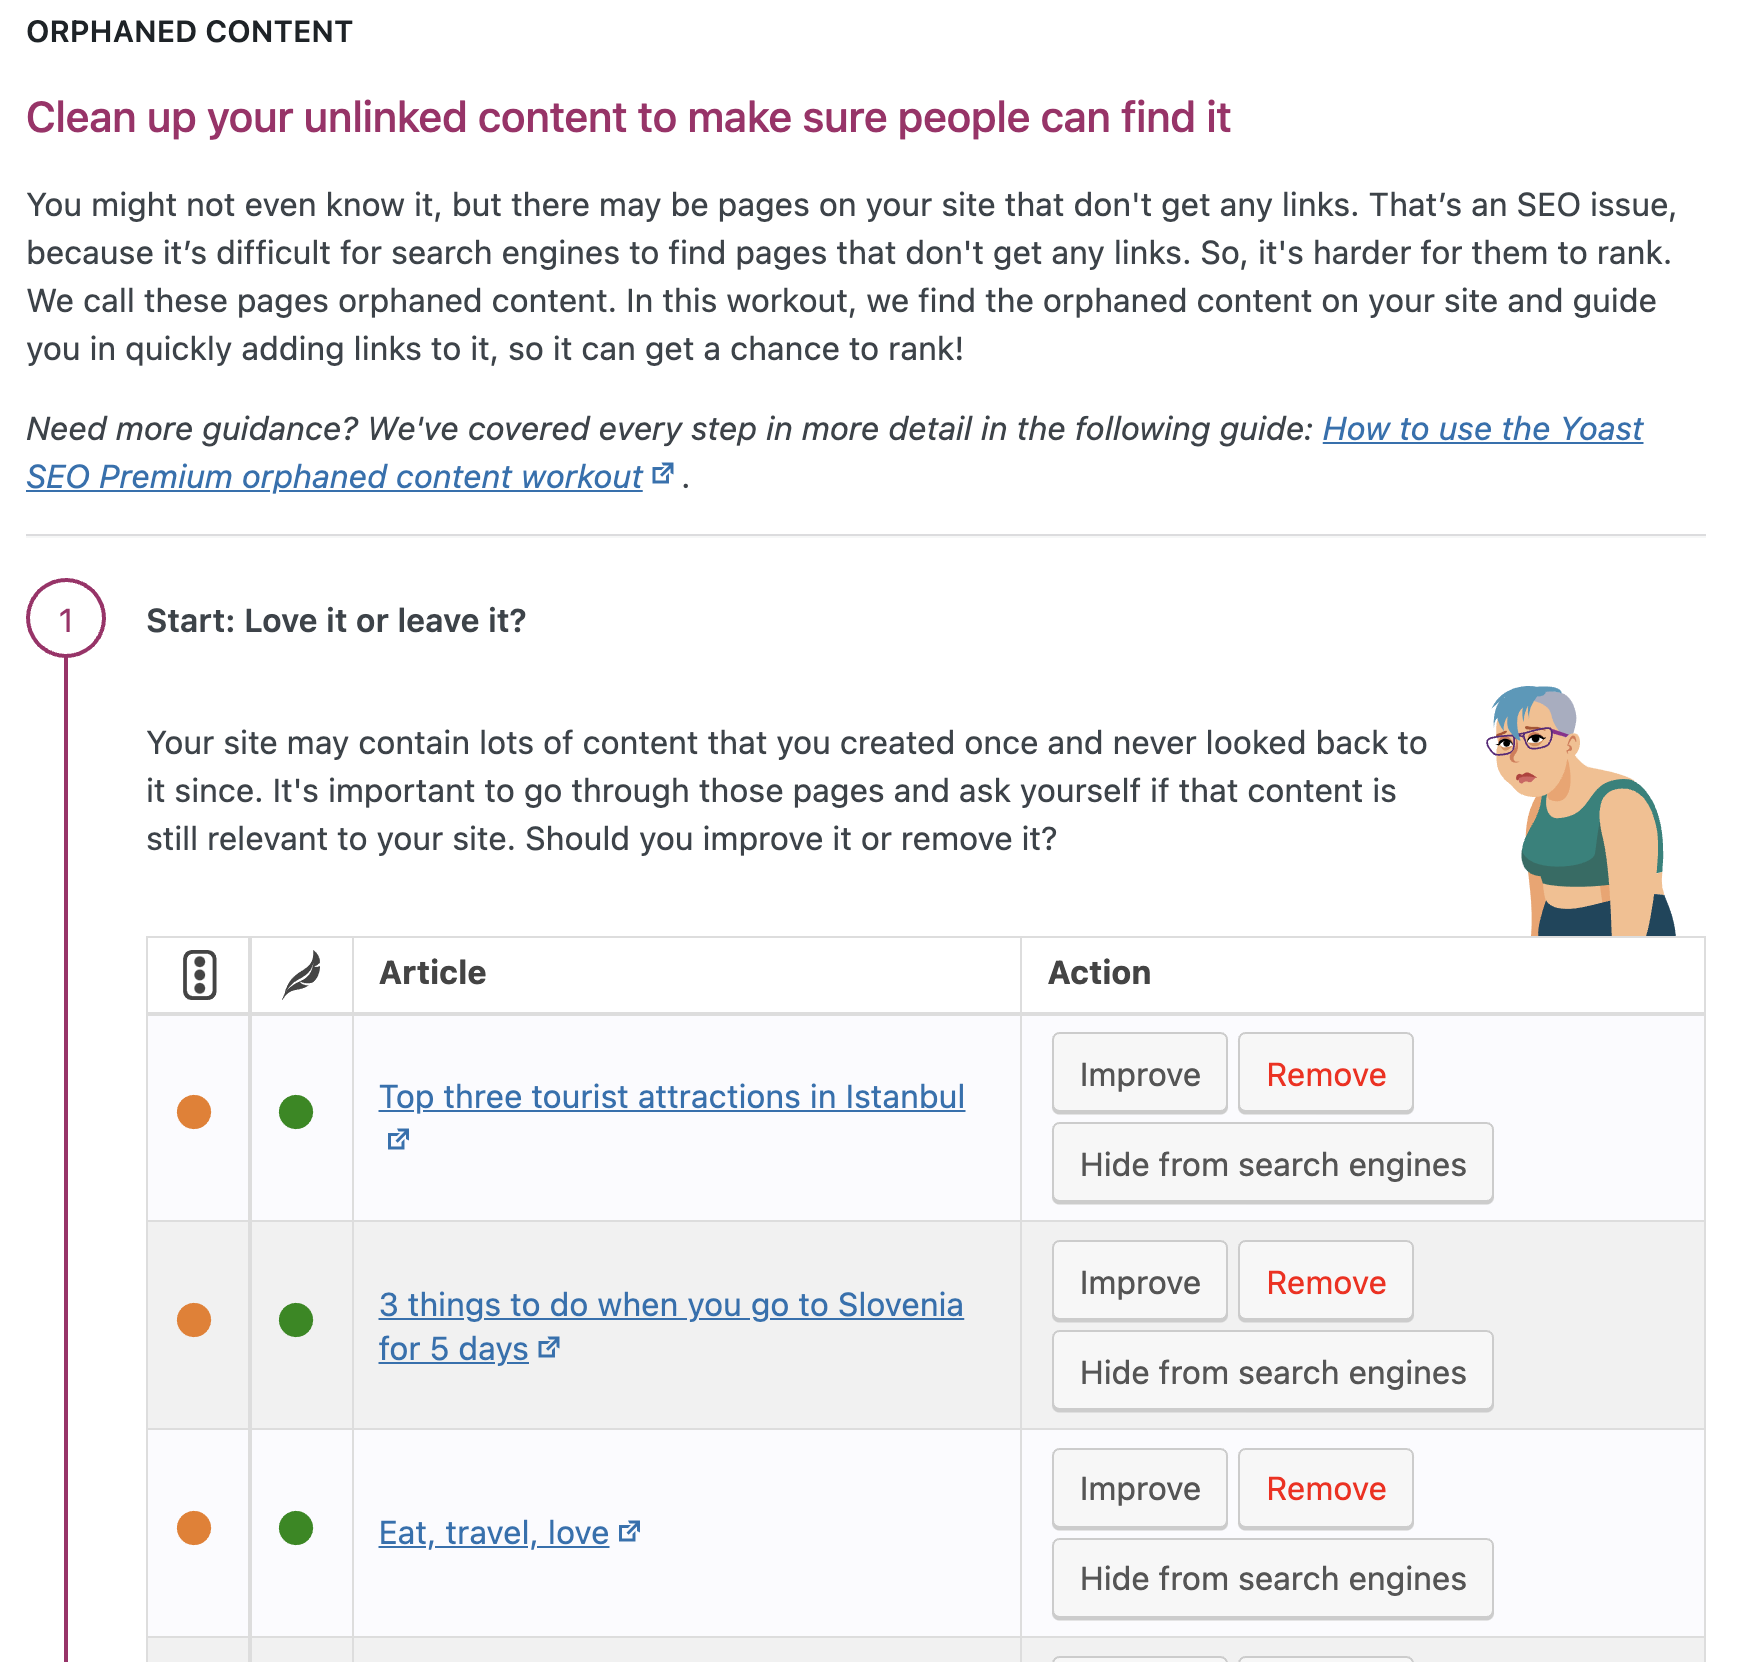 content maintenance orphaned content workout yoast seo